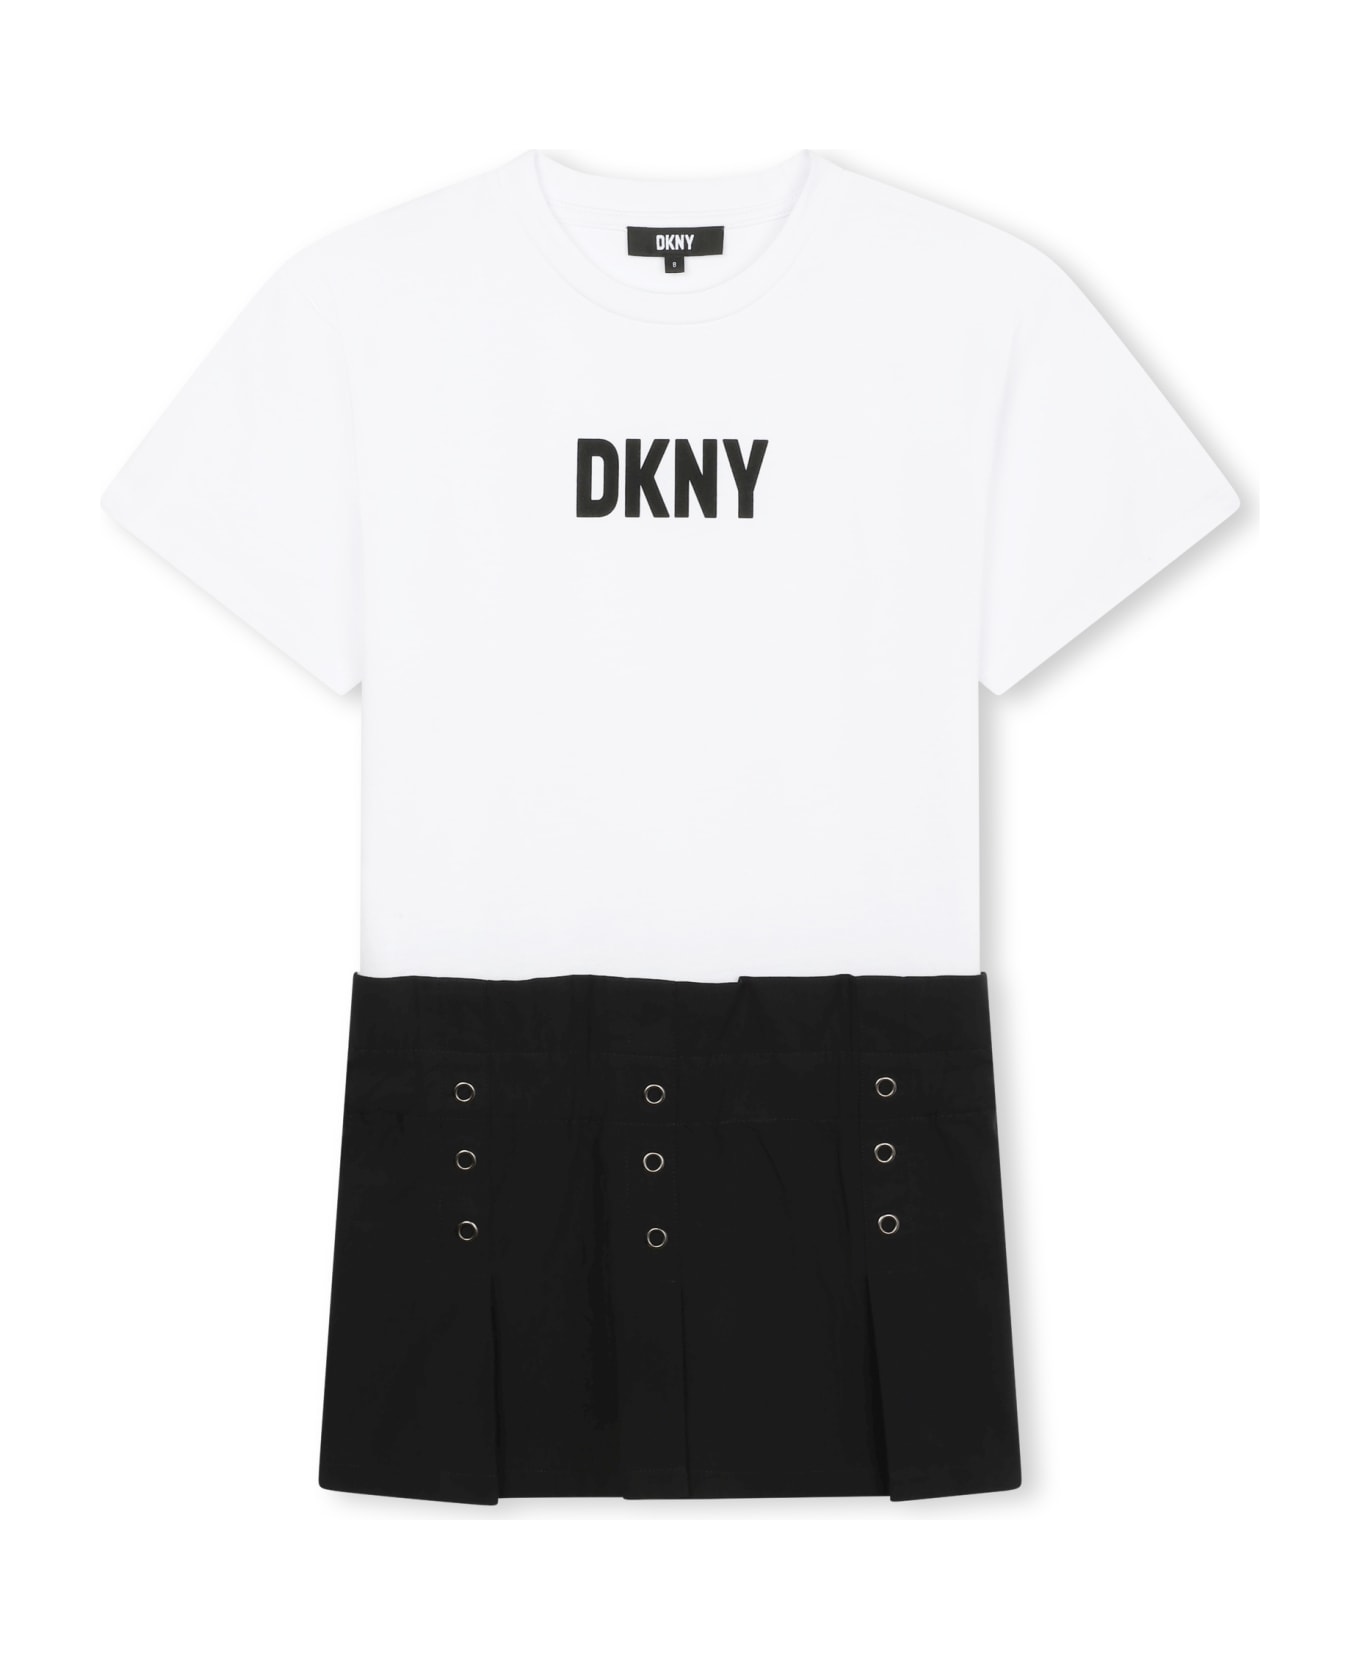 DKNY Dresses With Print - White